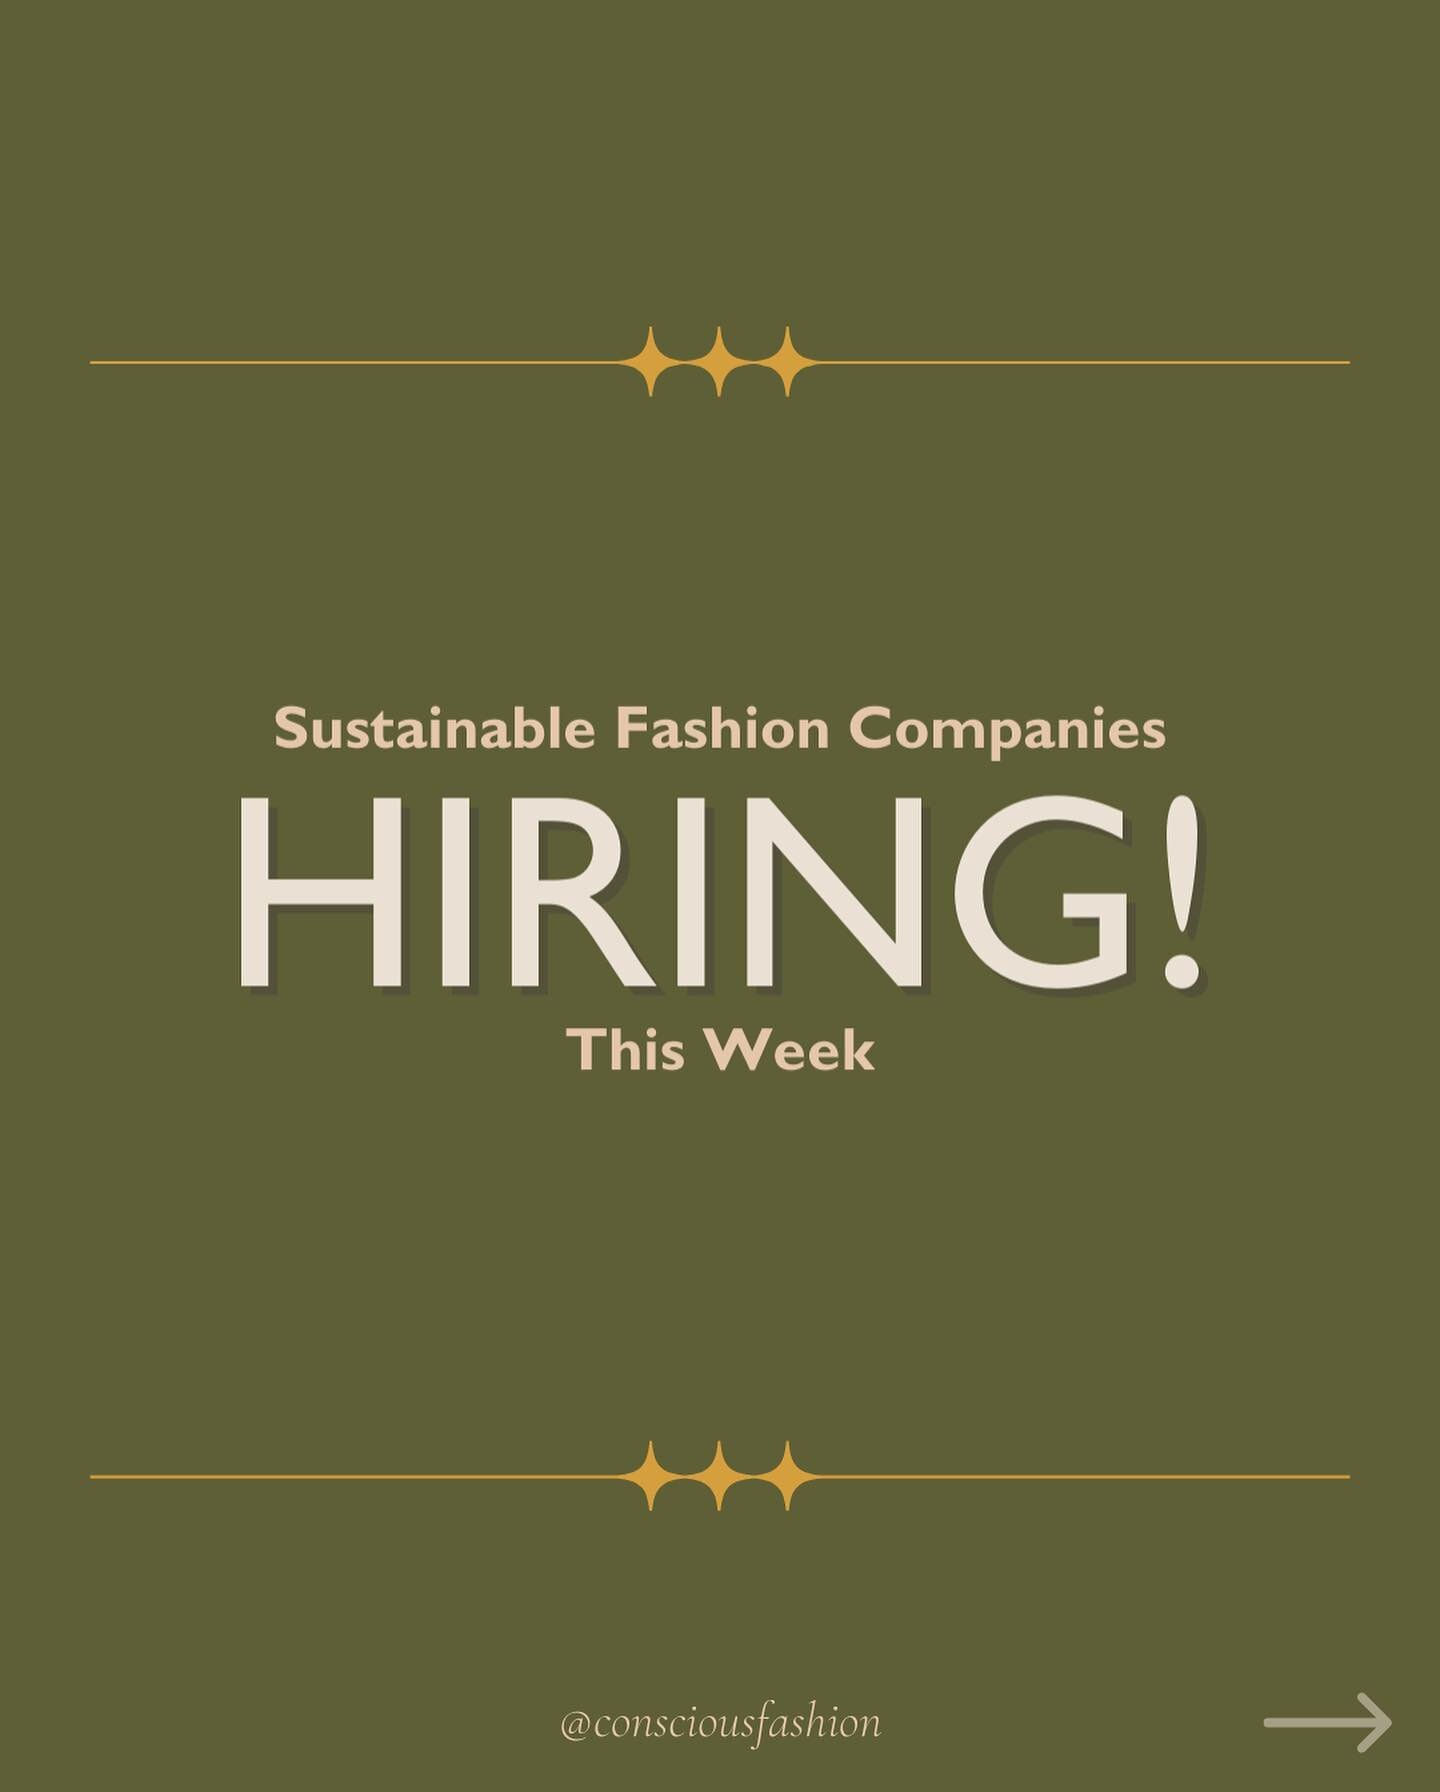 🧑🏾&zwj;💻 Apply today to these and 20+ new sustainable fashion job opportunities added to our Job Board!⁠
⁠
🌏  We update our Job Board with sustainable fashion job opportunities worldwide every week! Go to consciousfashion.co/jobs to check out Our